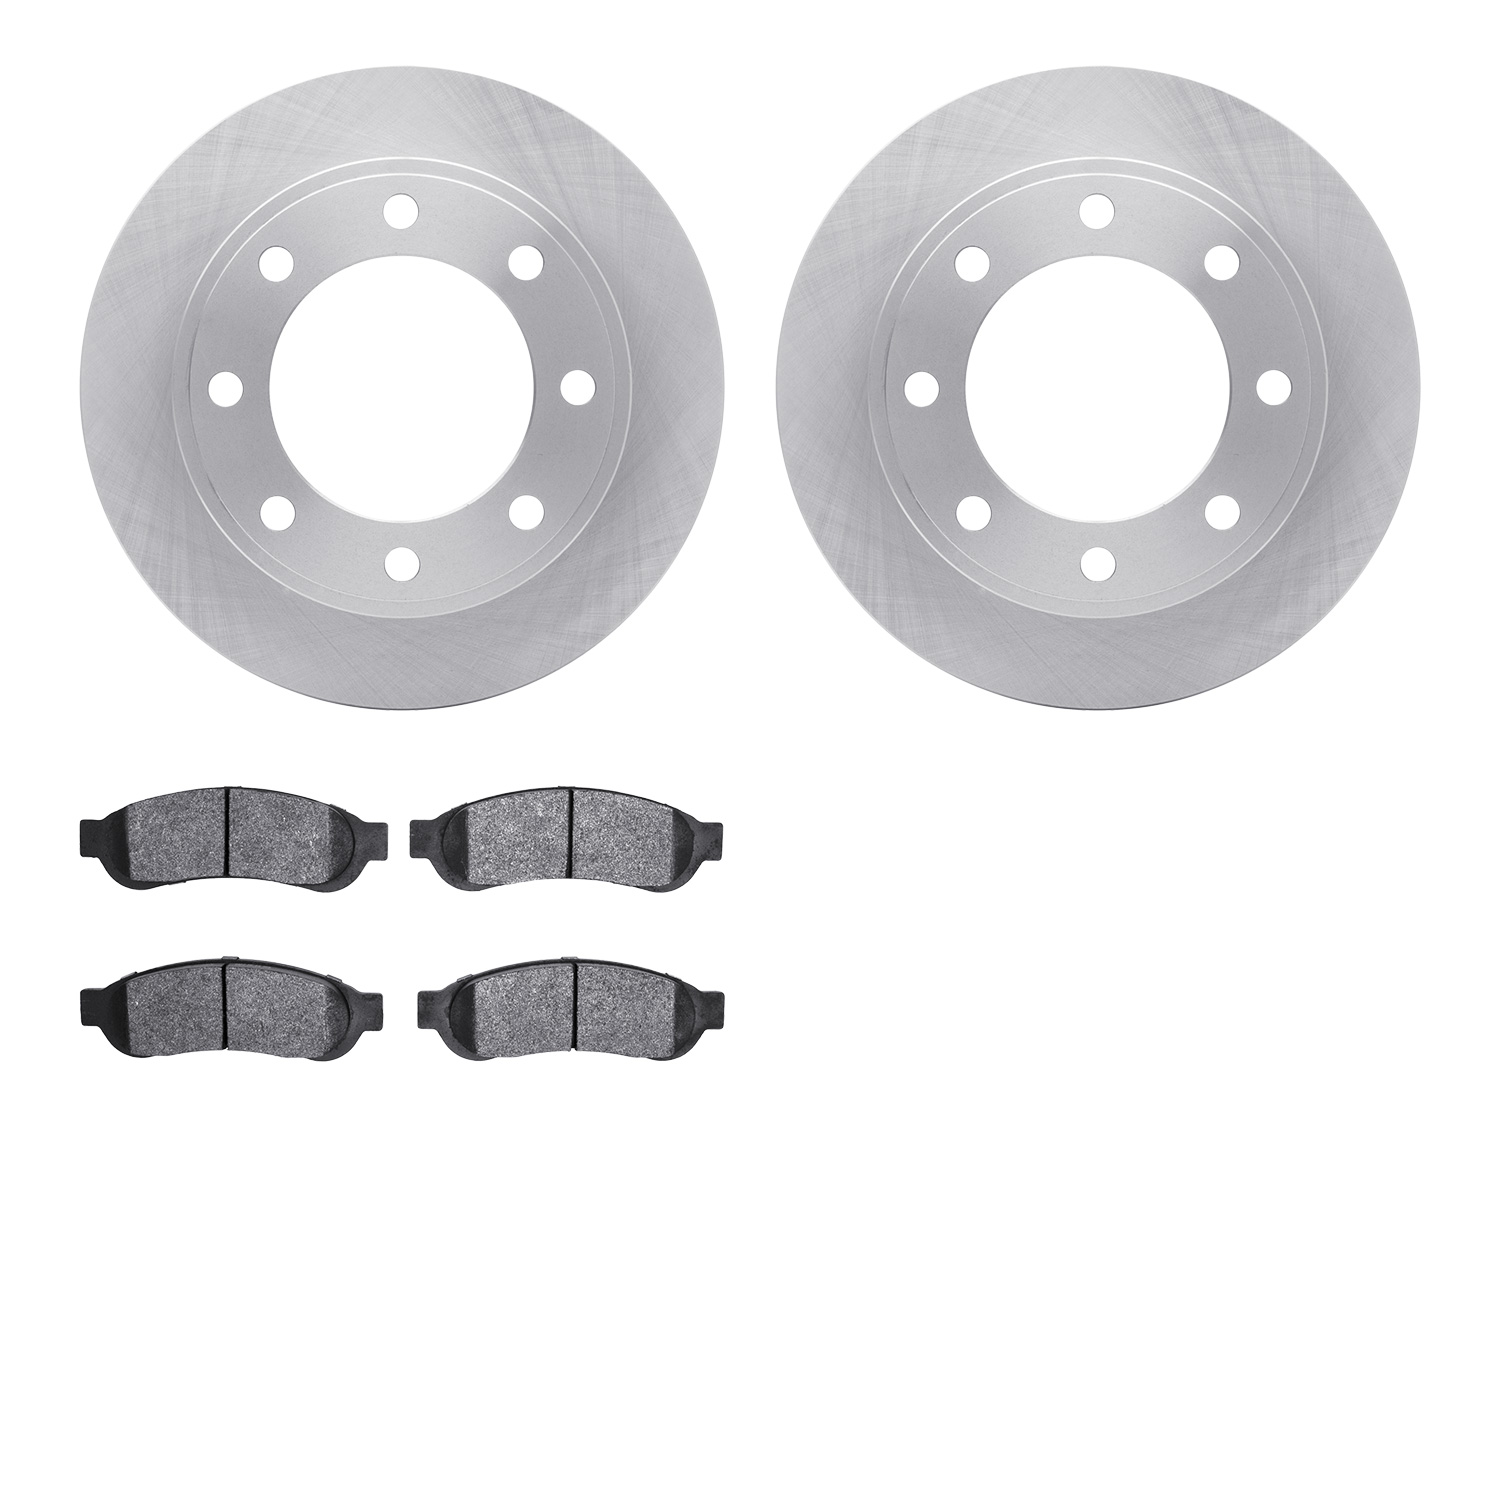 6402-54242 Brake Rotors with Ultimate-Duty Brake Pads, 2006-2010 Ford/Lincoln/Mercury/Mazda, Position: Rear